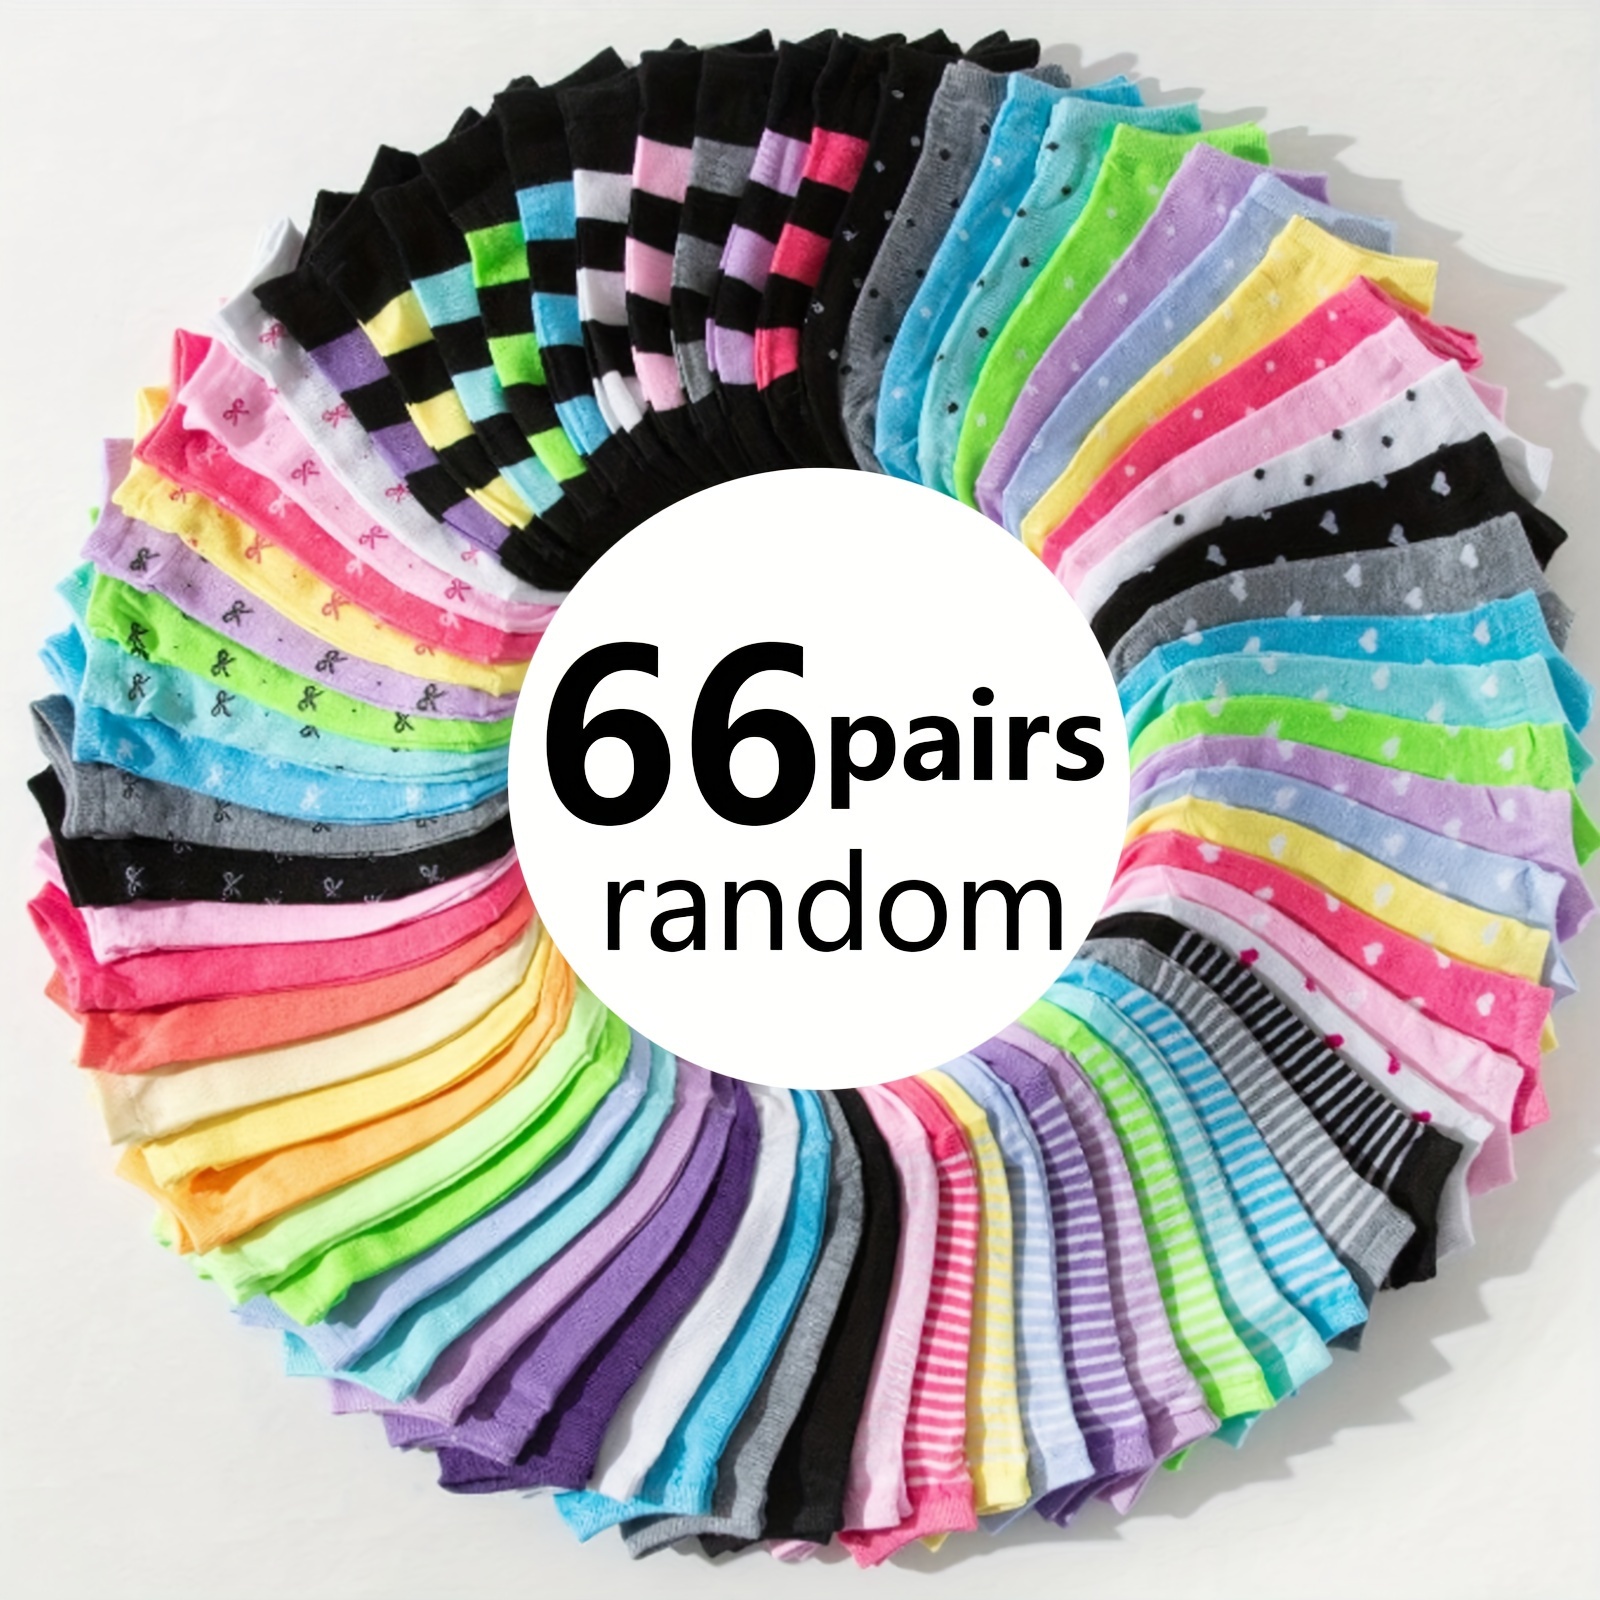 

66pairs Oversized Combination Candy Colored Women's Socks, Spring, Summer, And Autumn Dopamine Socks, Casual And Versatile Breathable And Comfortable Soft Socks